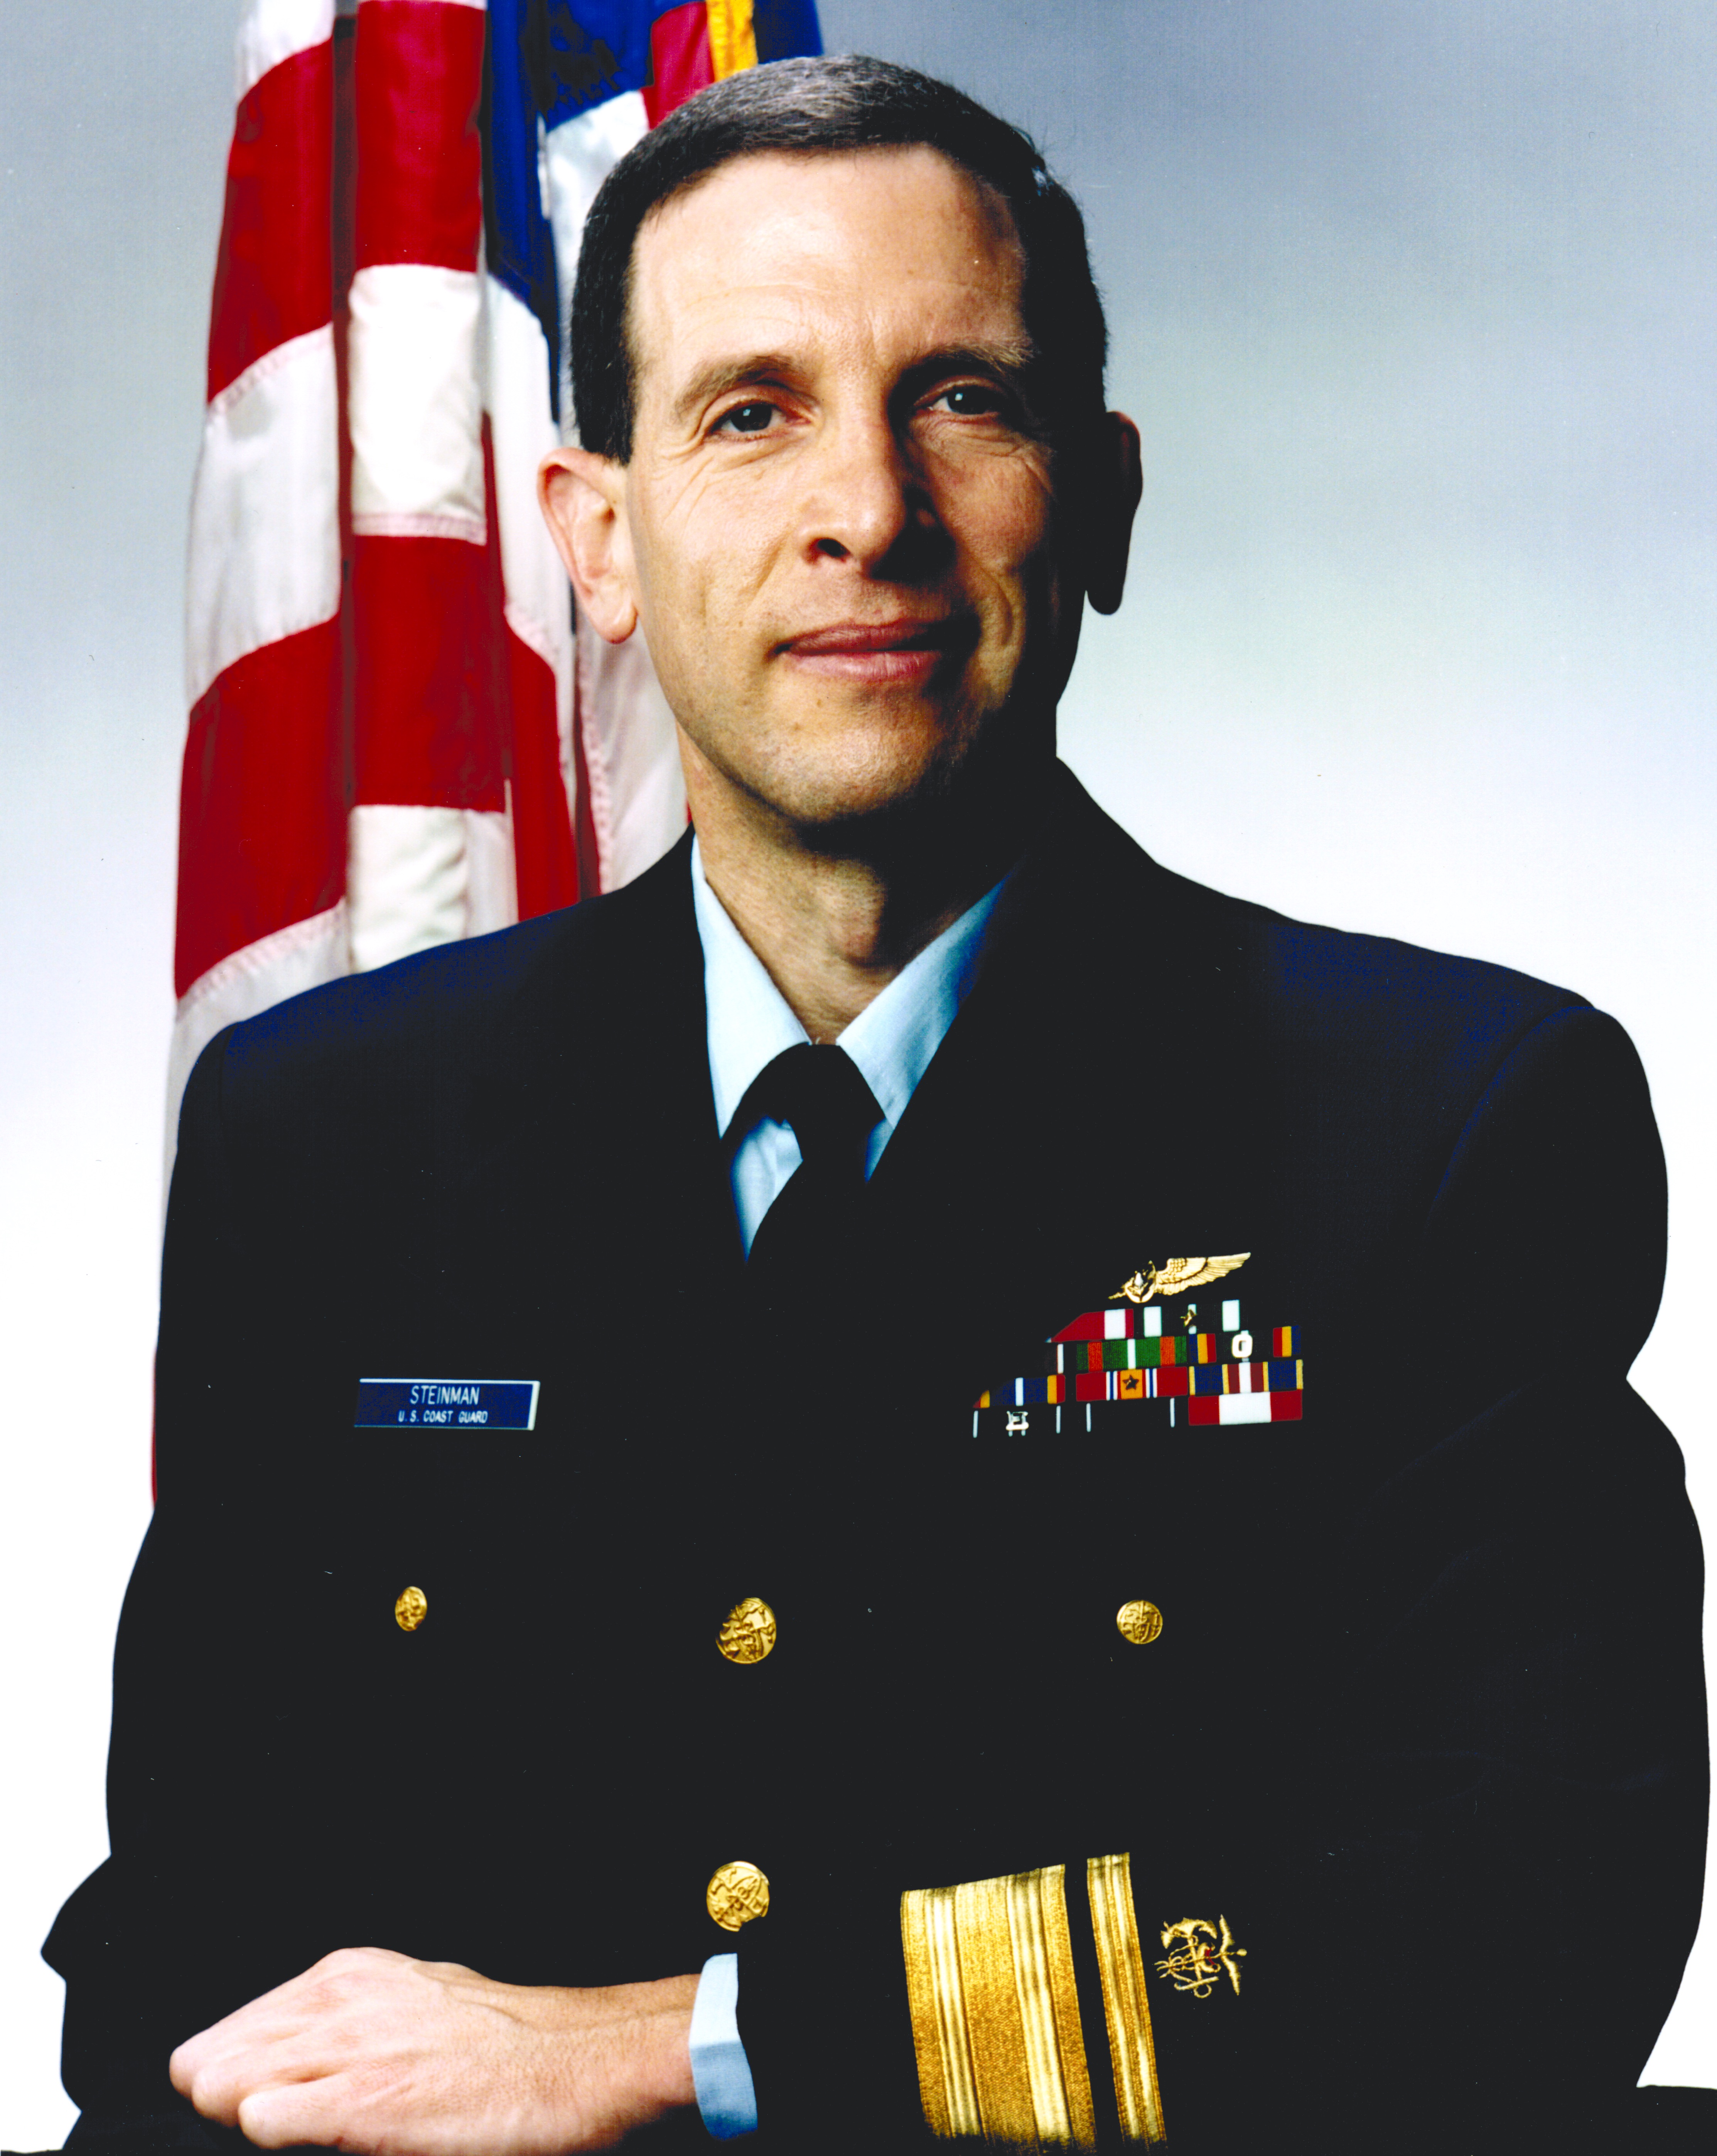 Alan’s official Coast Guard portrait photograph following his promotion to the rank of Rear Admiral and to the position of Director of Health and Safety, U.S. Coast Guard Headquarters, Washington, DC, 1993.